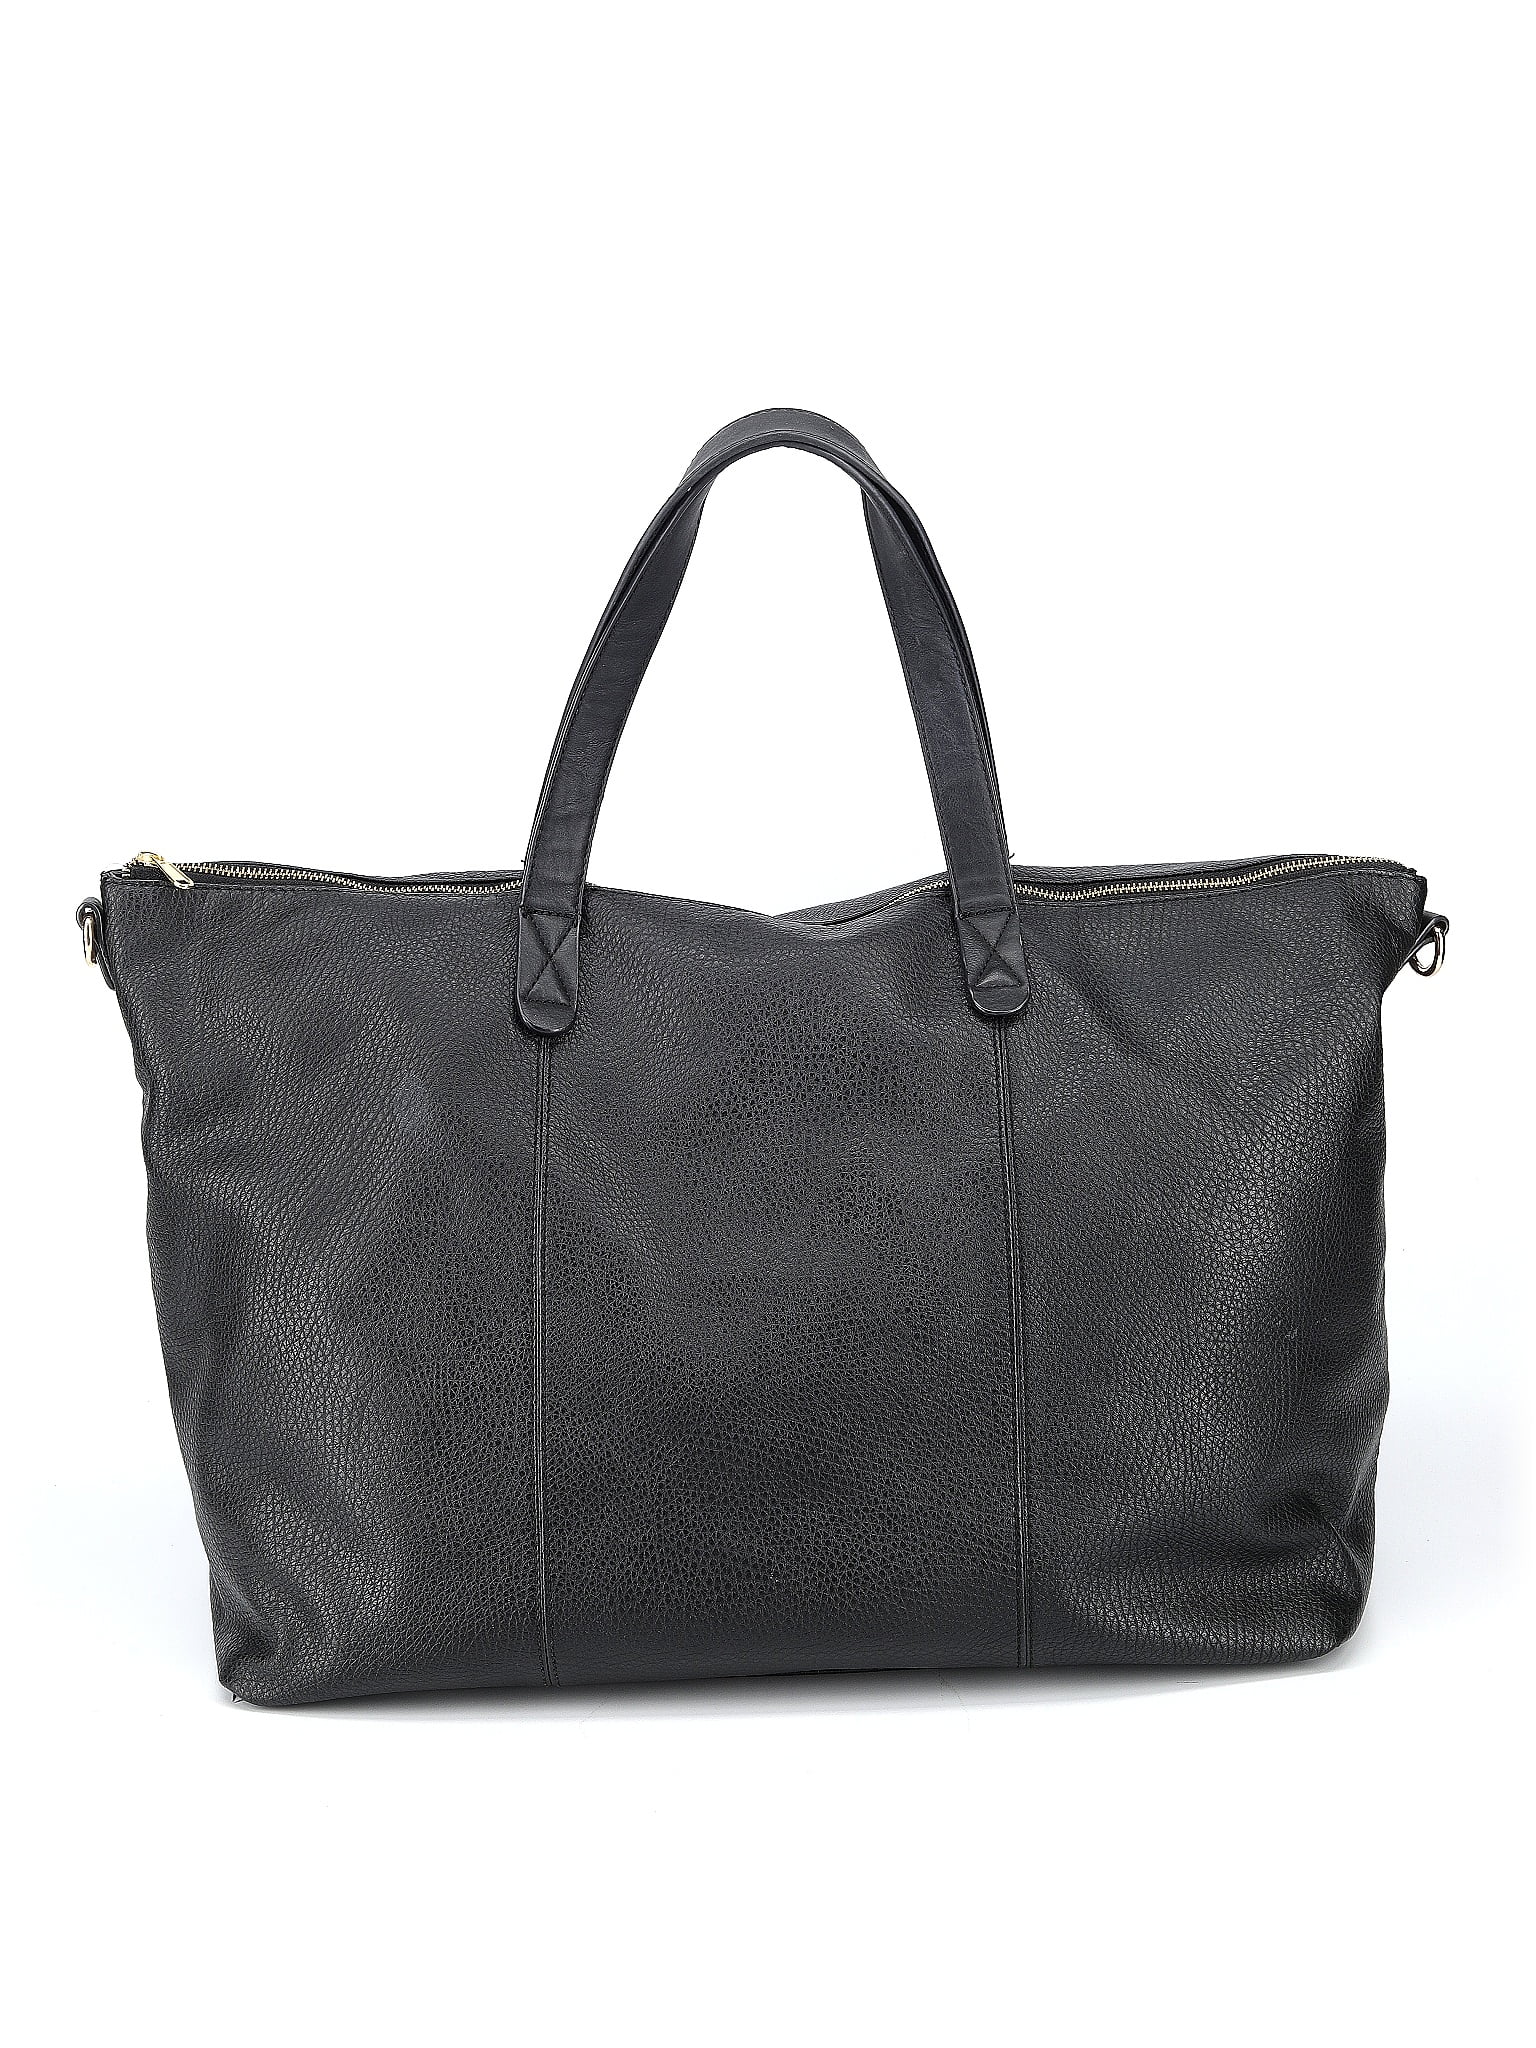 Sole Society Black Tote One Size - 39% off | thredUP